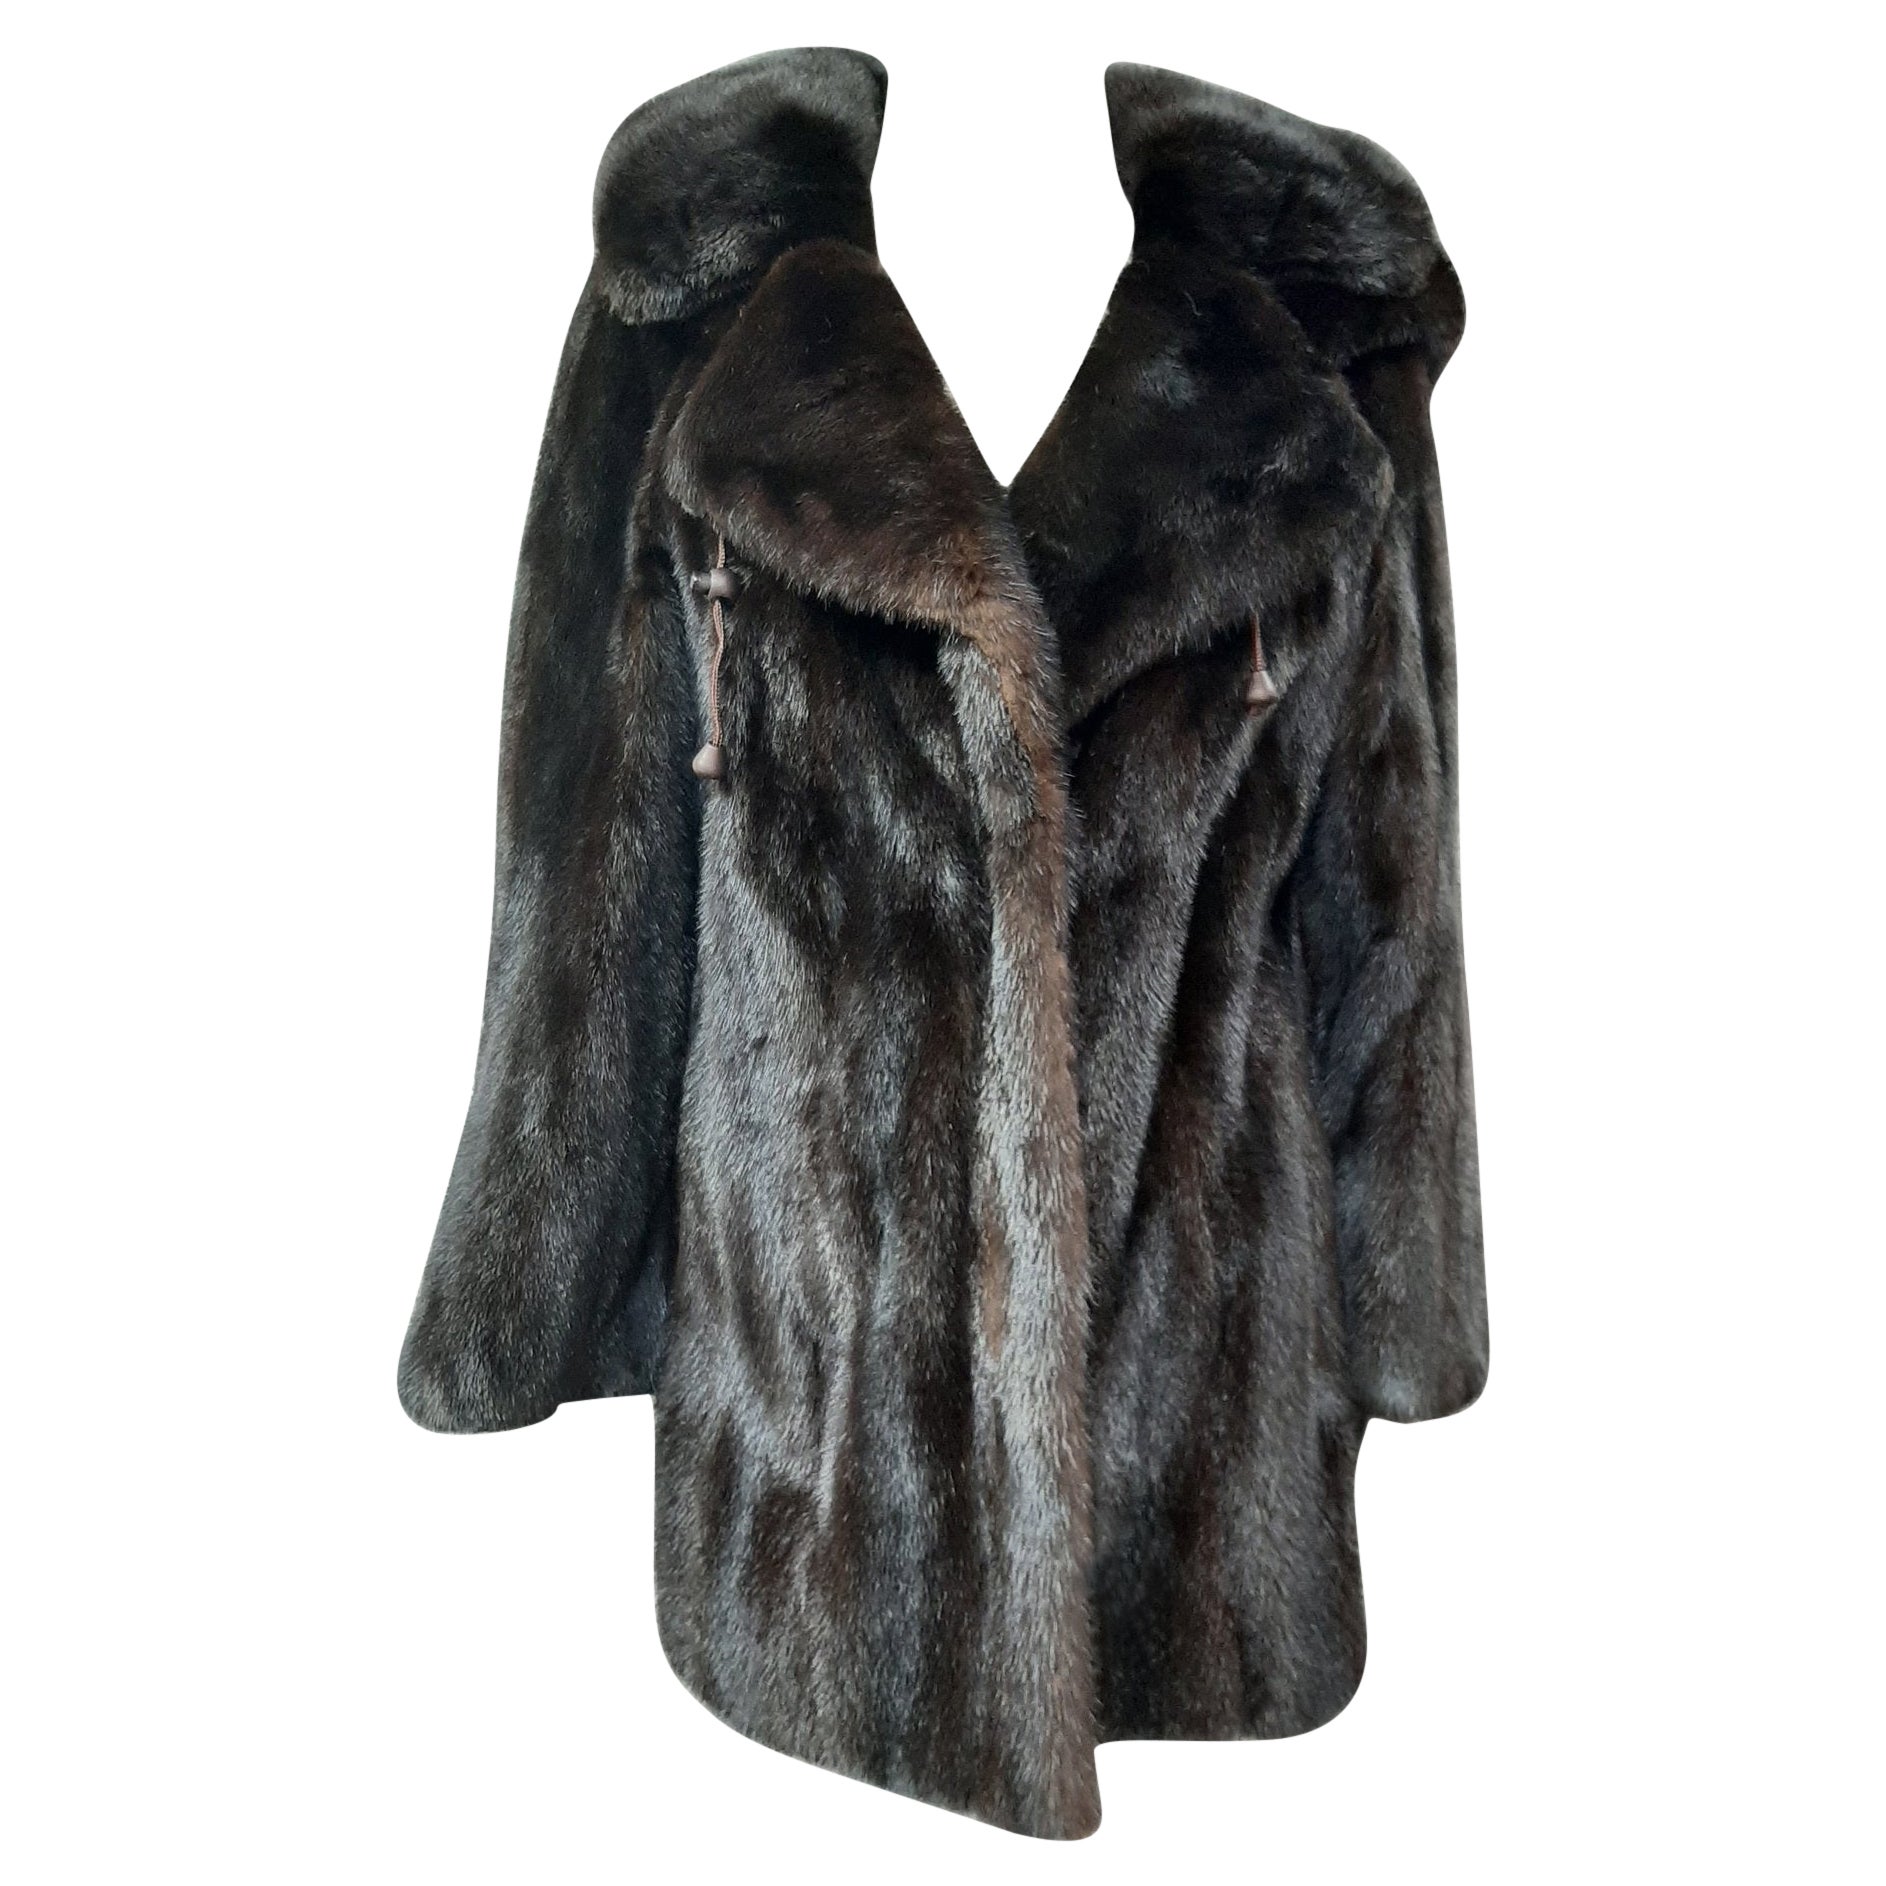 Unused mink fur coat with a hood size 14 For Sale